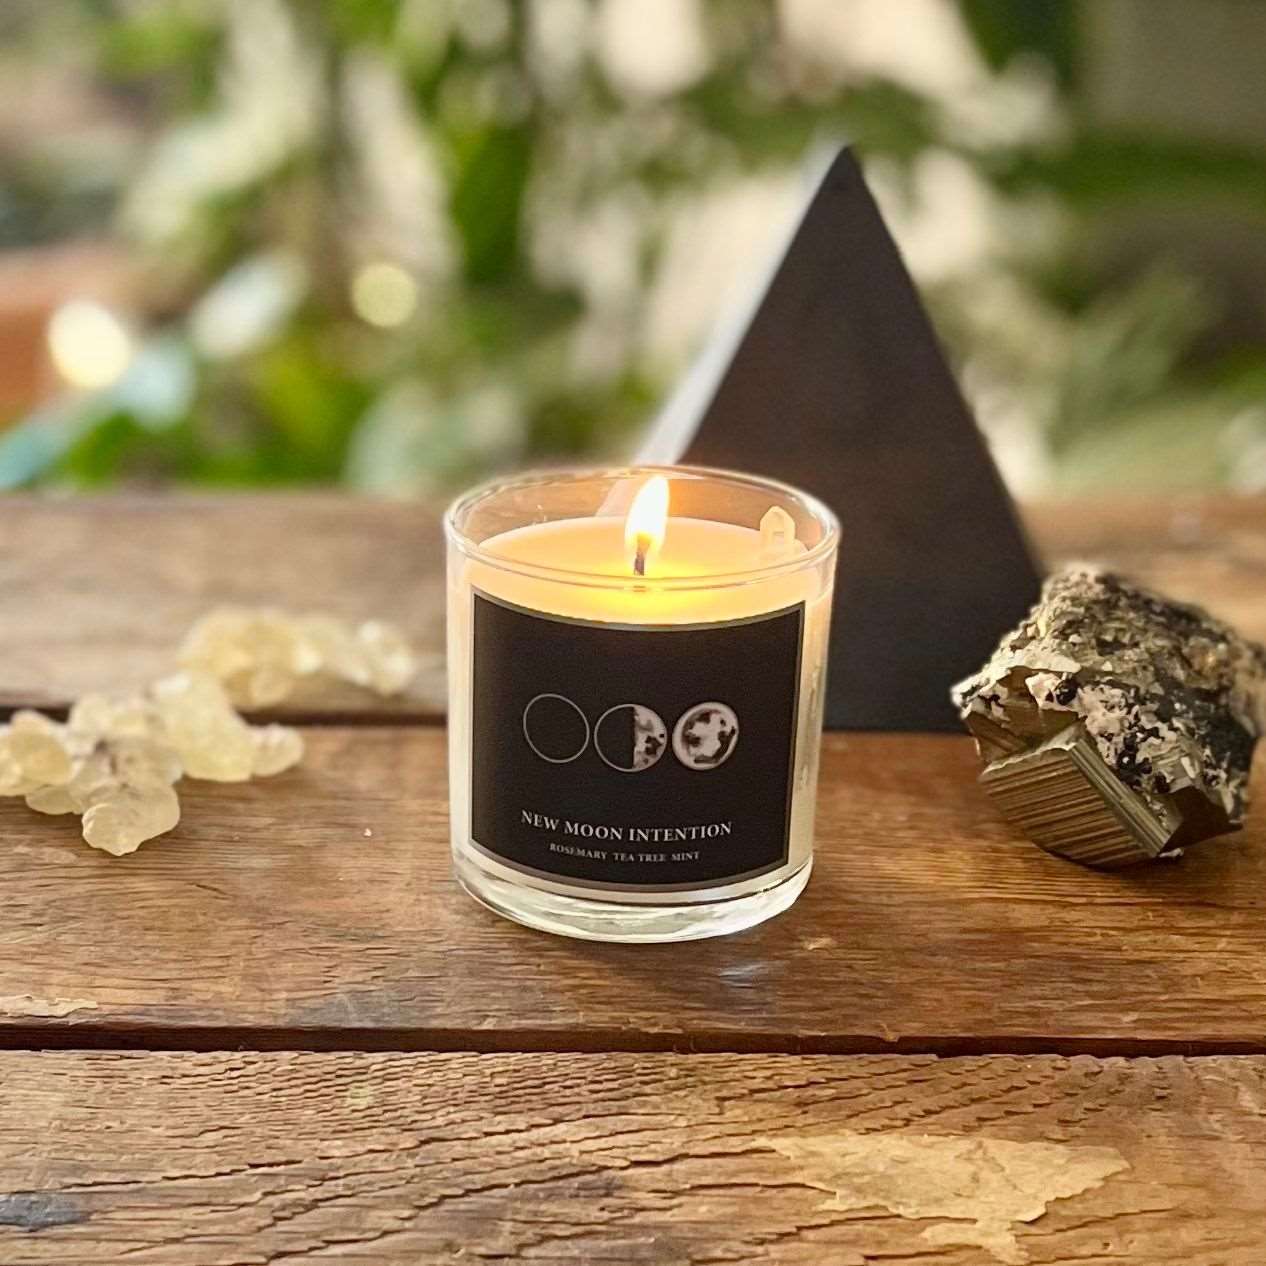 6 oz Natural GMM-Free Soy Wax New Moon Intention Candle for Fresh Beginnings, Clarity, and Renewed Energy with Organic Rosemary, Tea Tree, and Mint Essential Oils and Clear Quartz Crystal